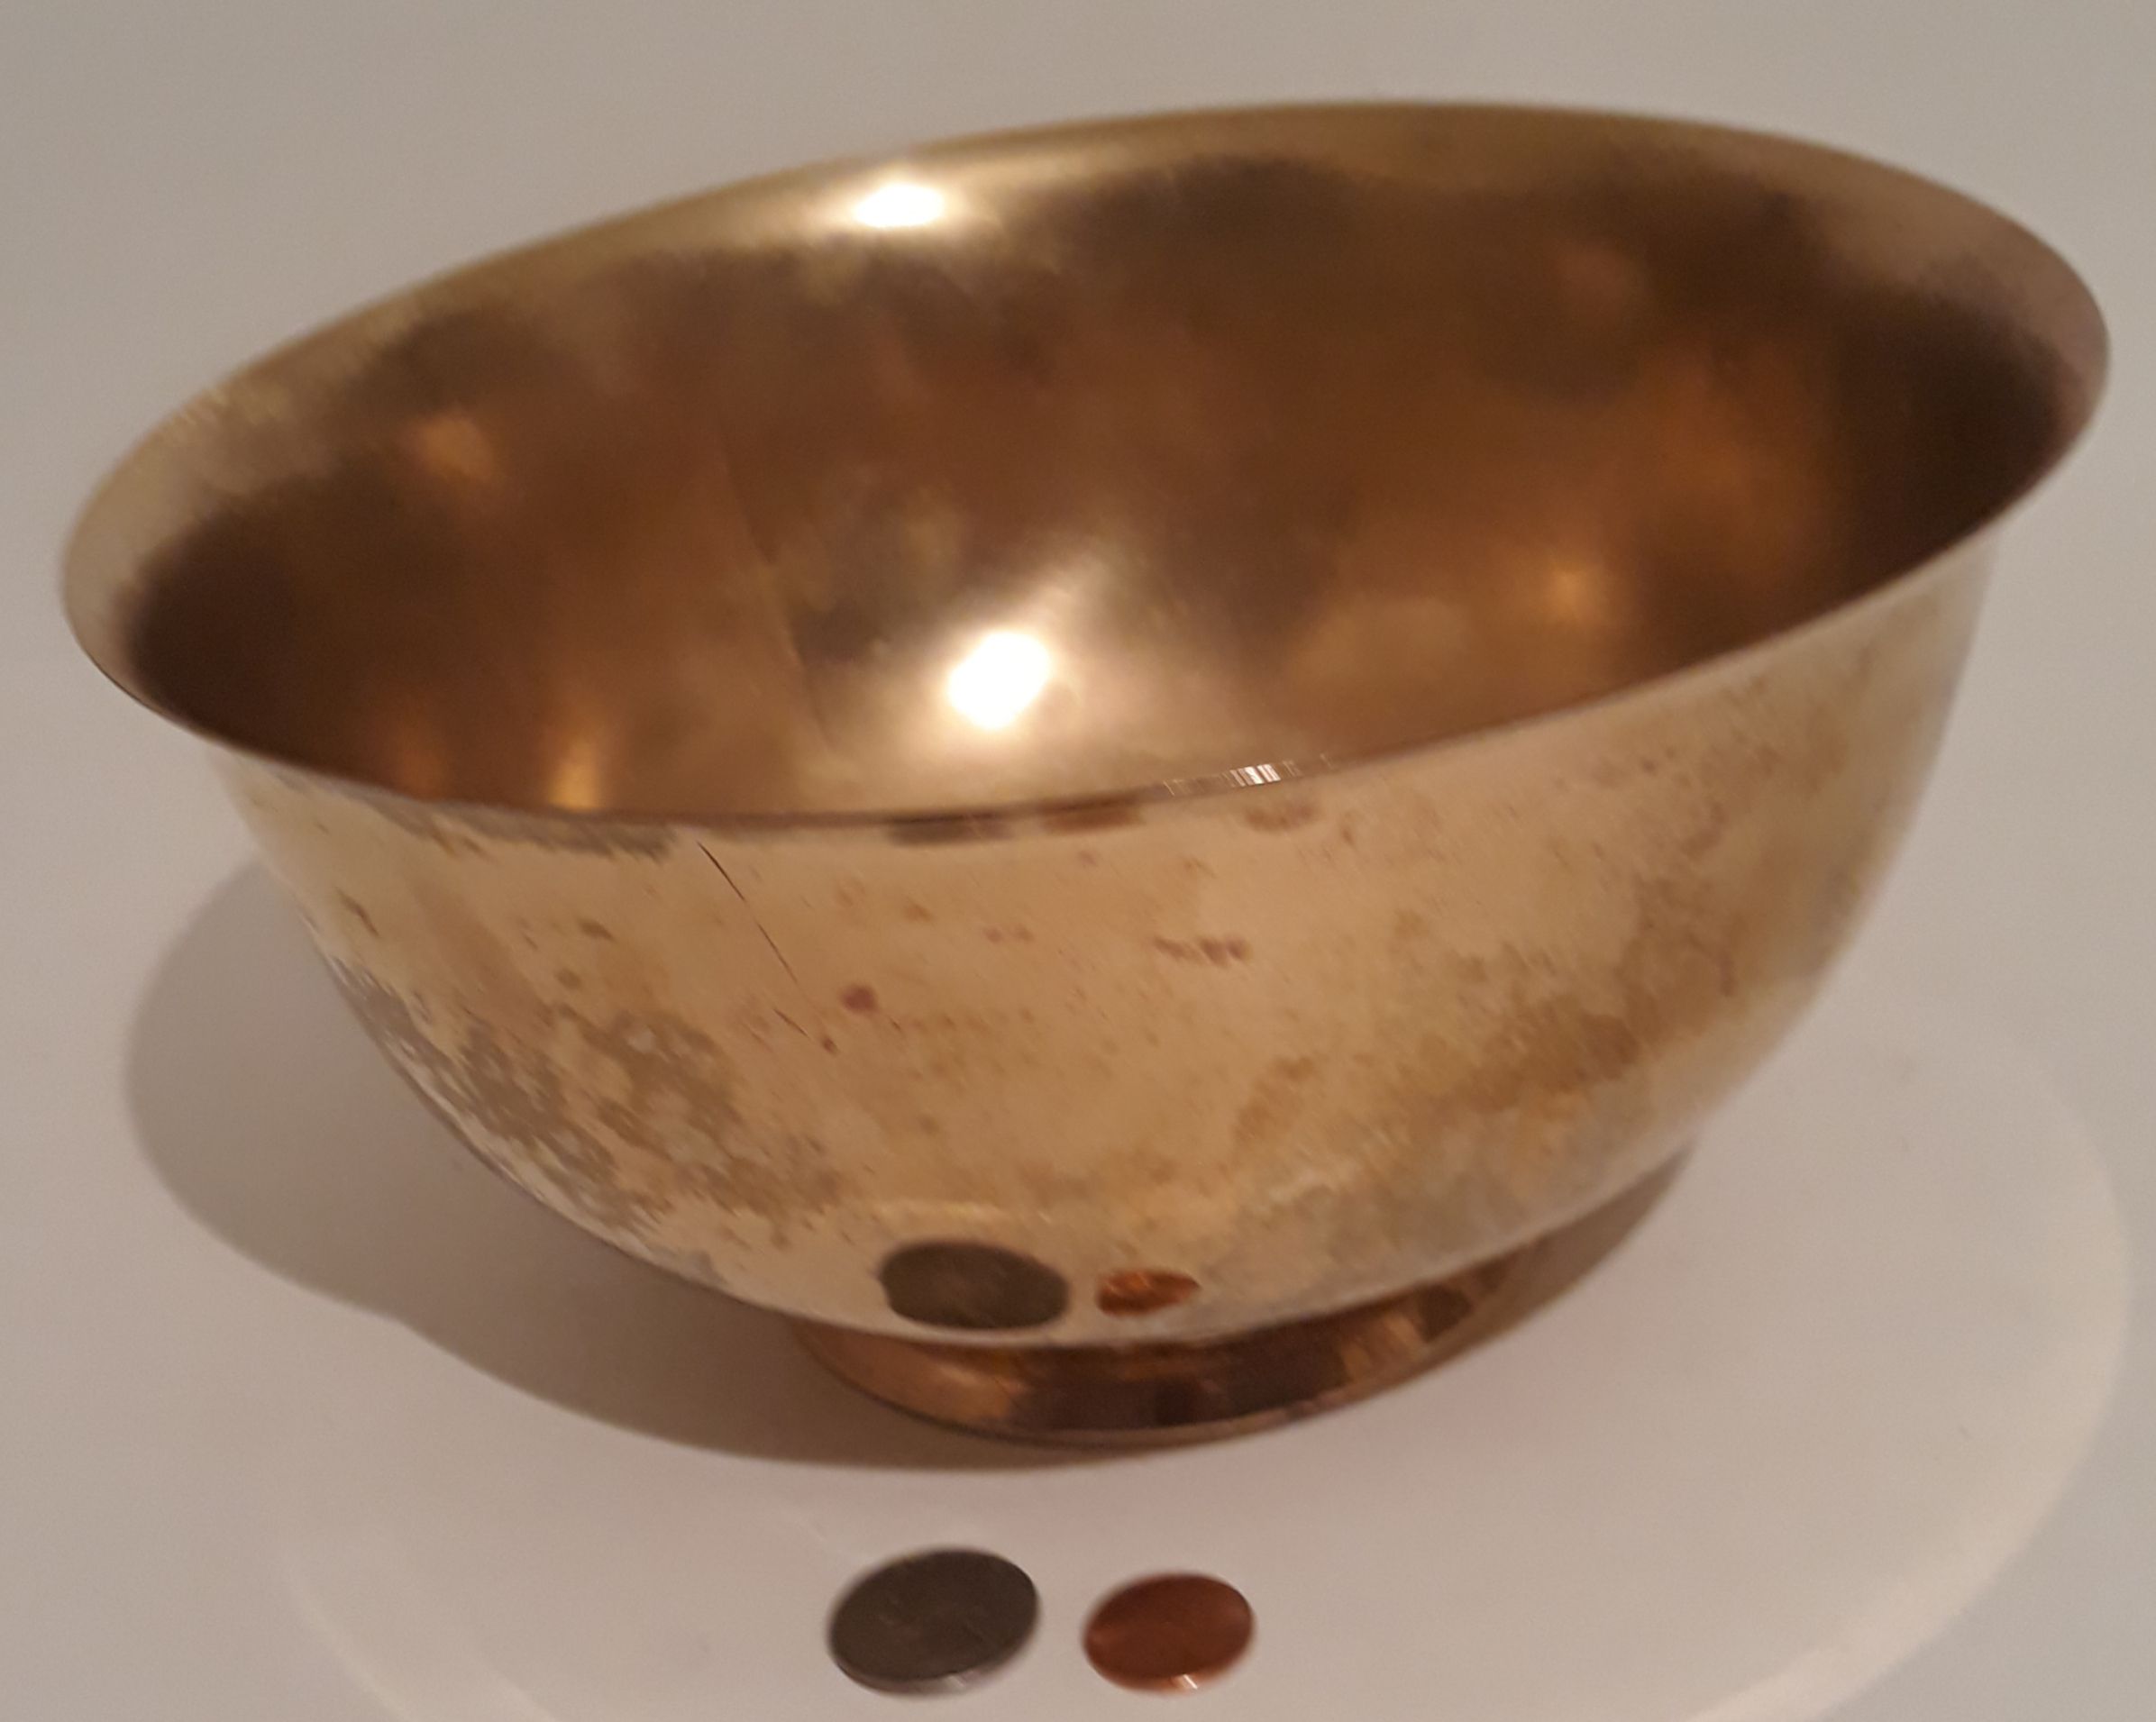 Vintage Brass Metal Bowl, 9" x 5", Kitchen Decor, Table Display, Shelf Display, This Can Be Shined Up Even More